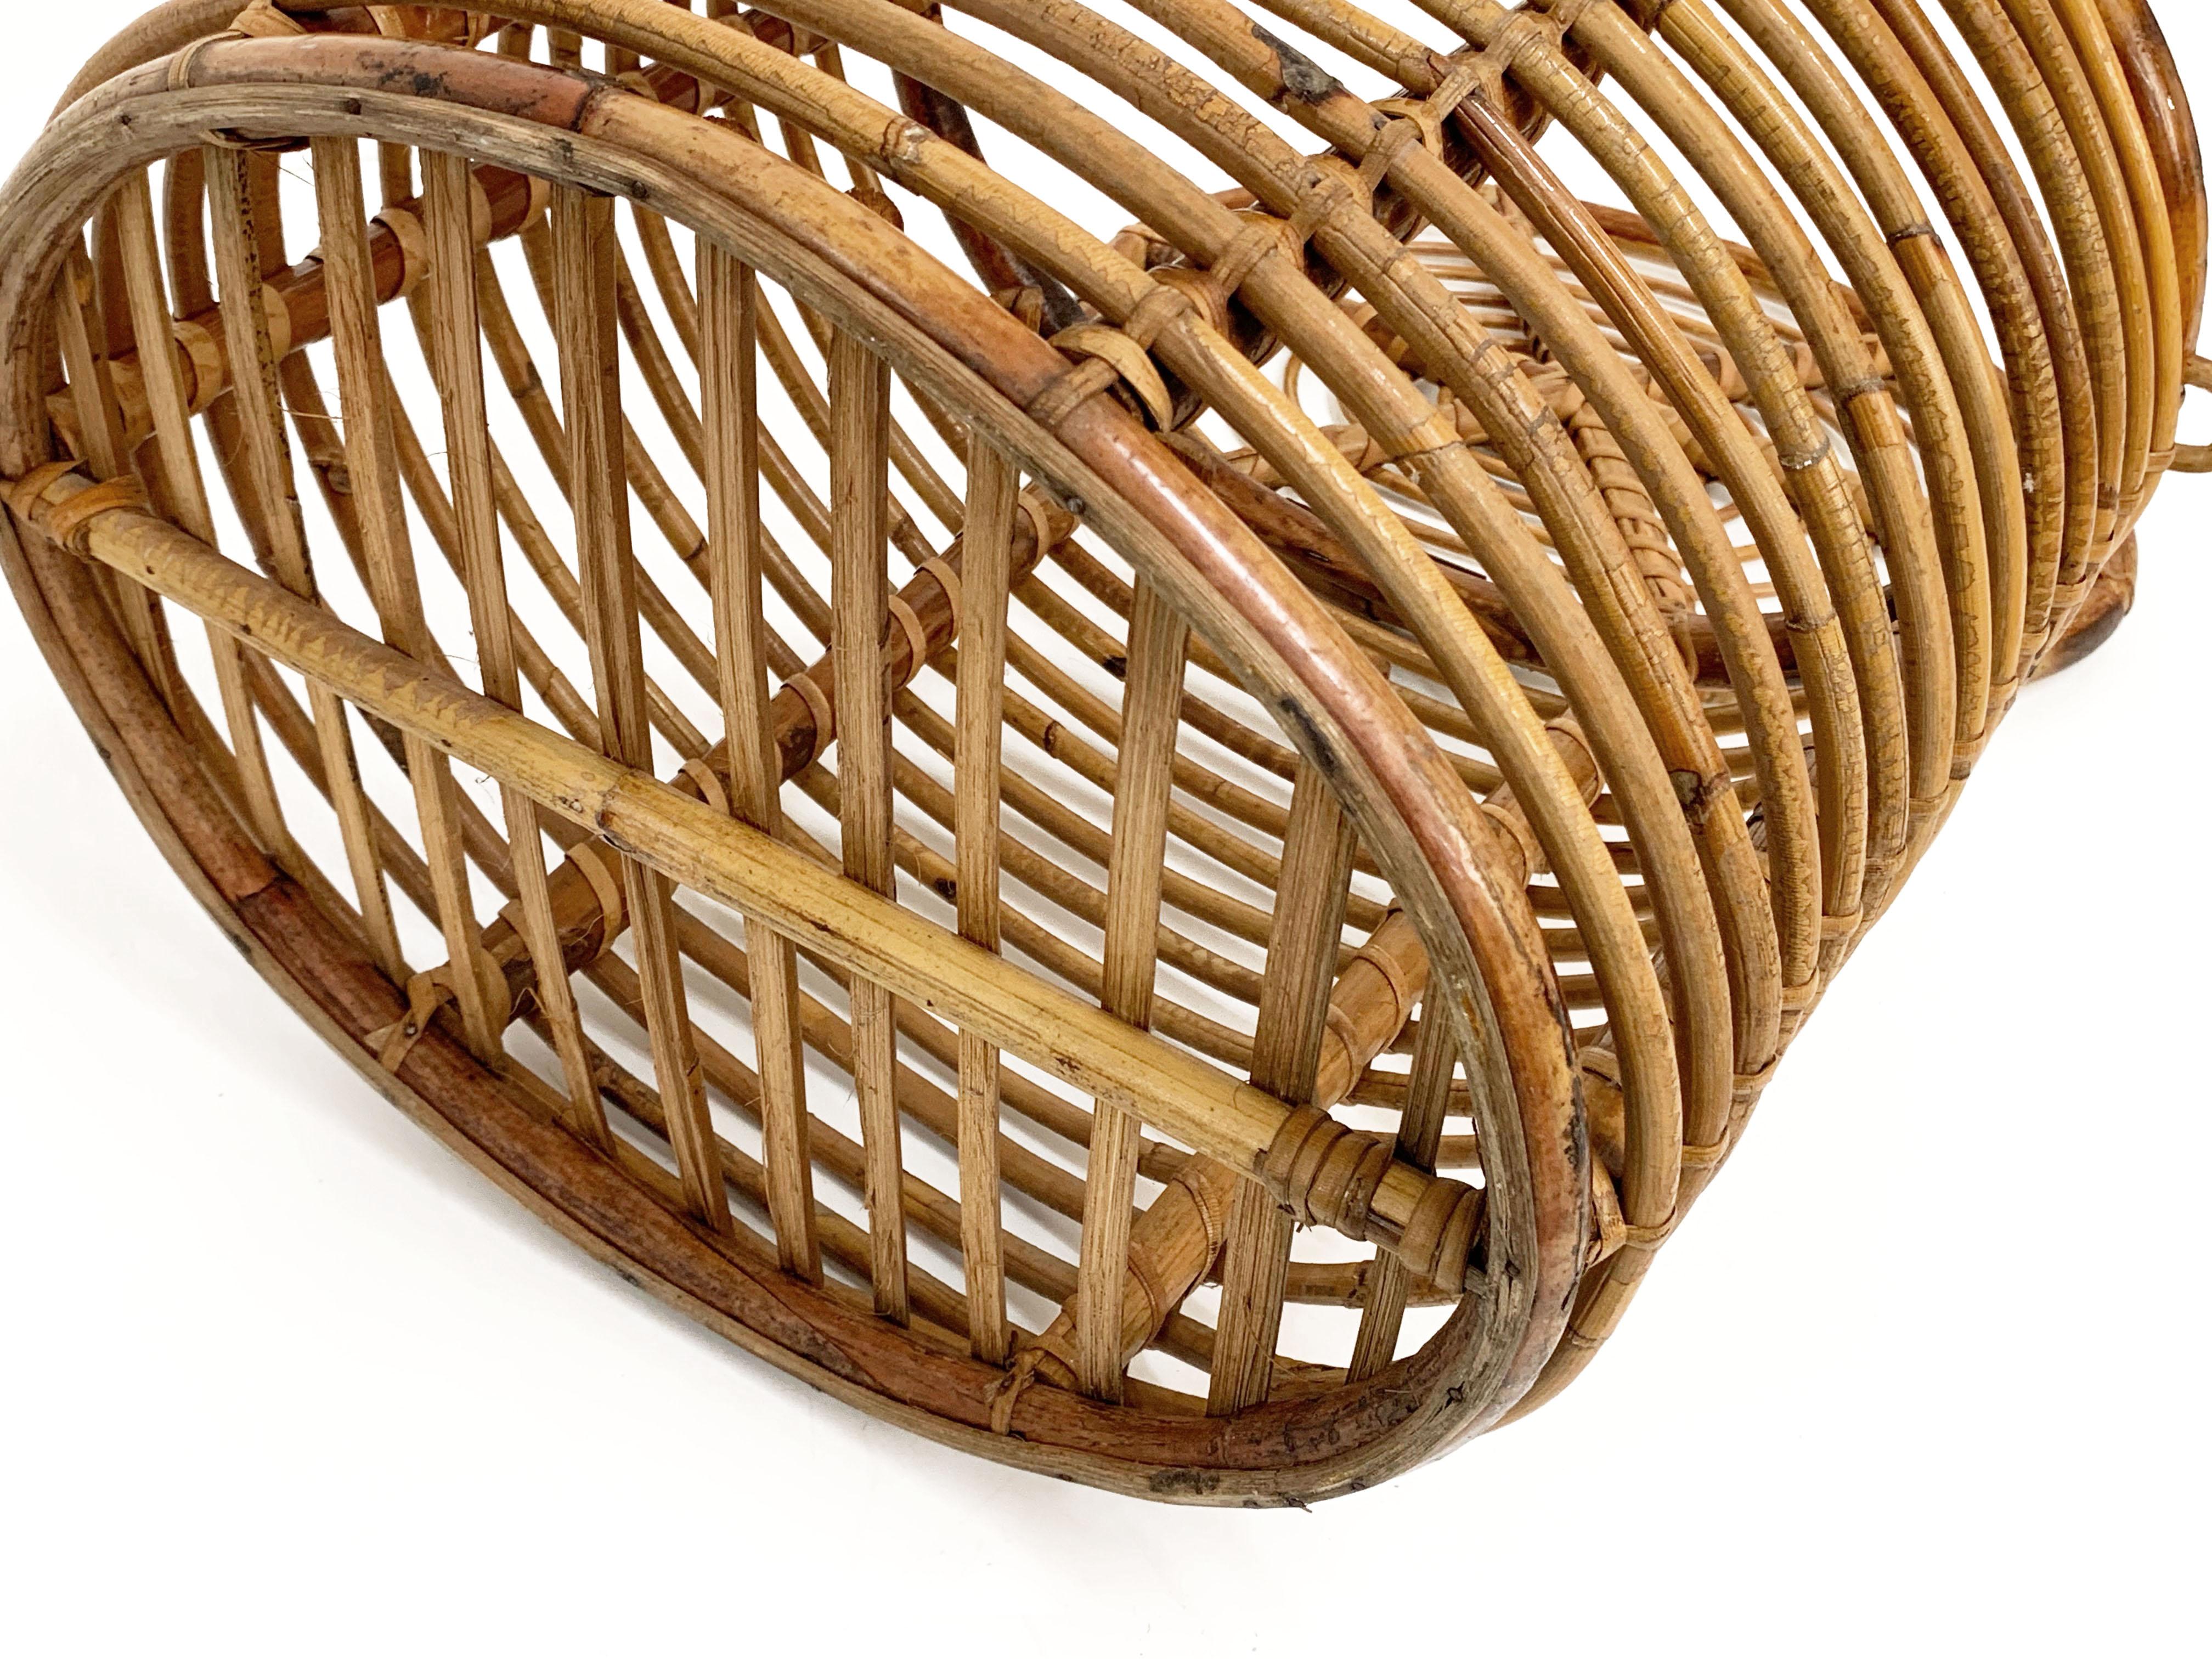 Midcentury French Riviera Bamboo and Rattan Oval Italian Basket, 1950s For Sale 5